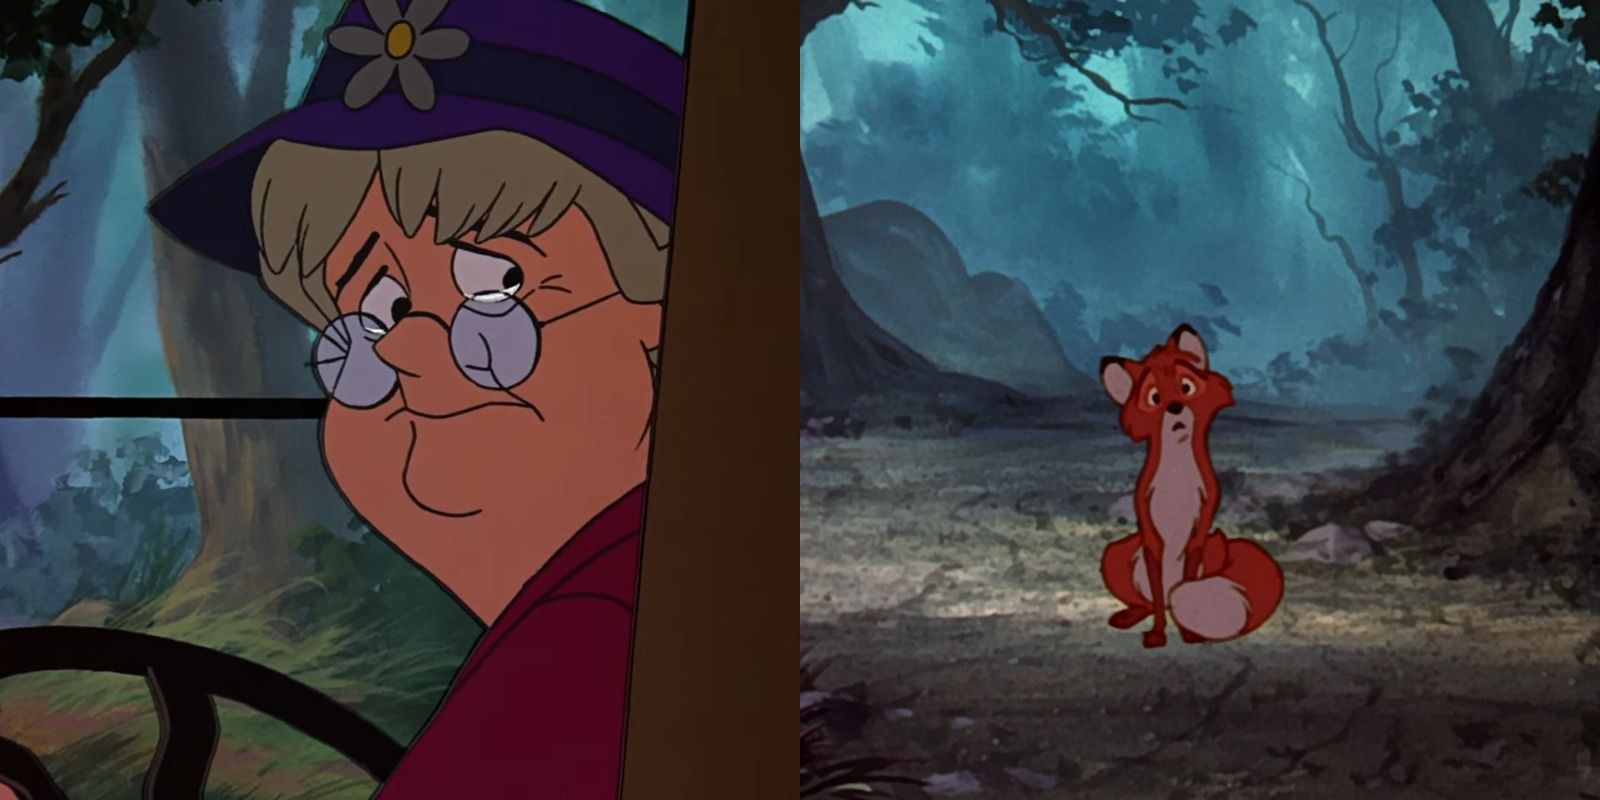 The Widow Tweed leaving Todd behind in The Fox And The Hound